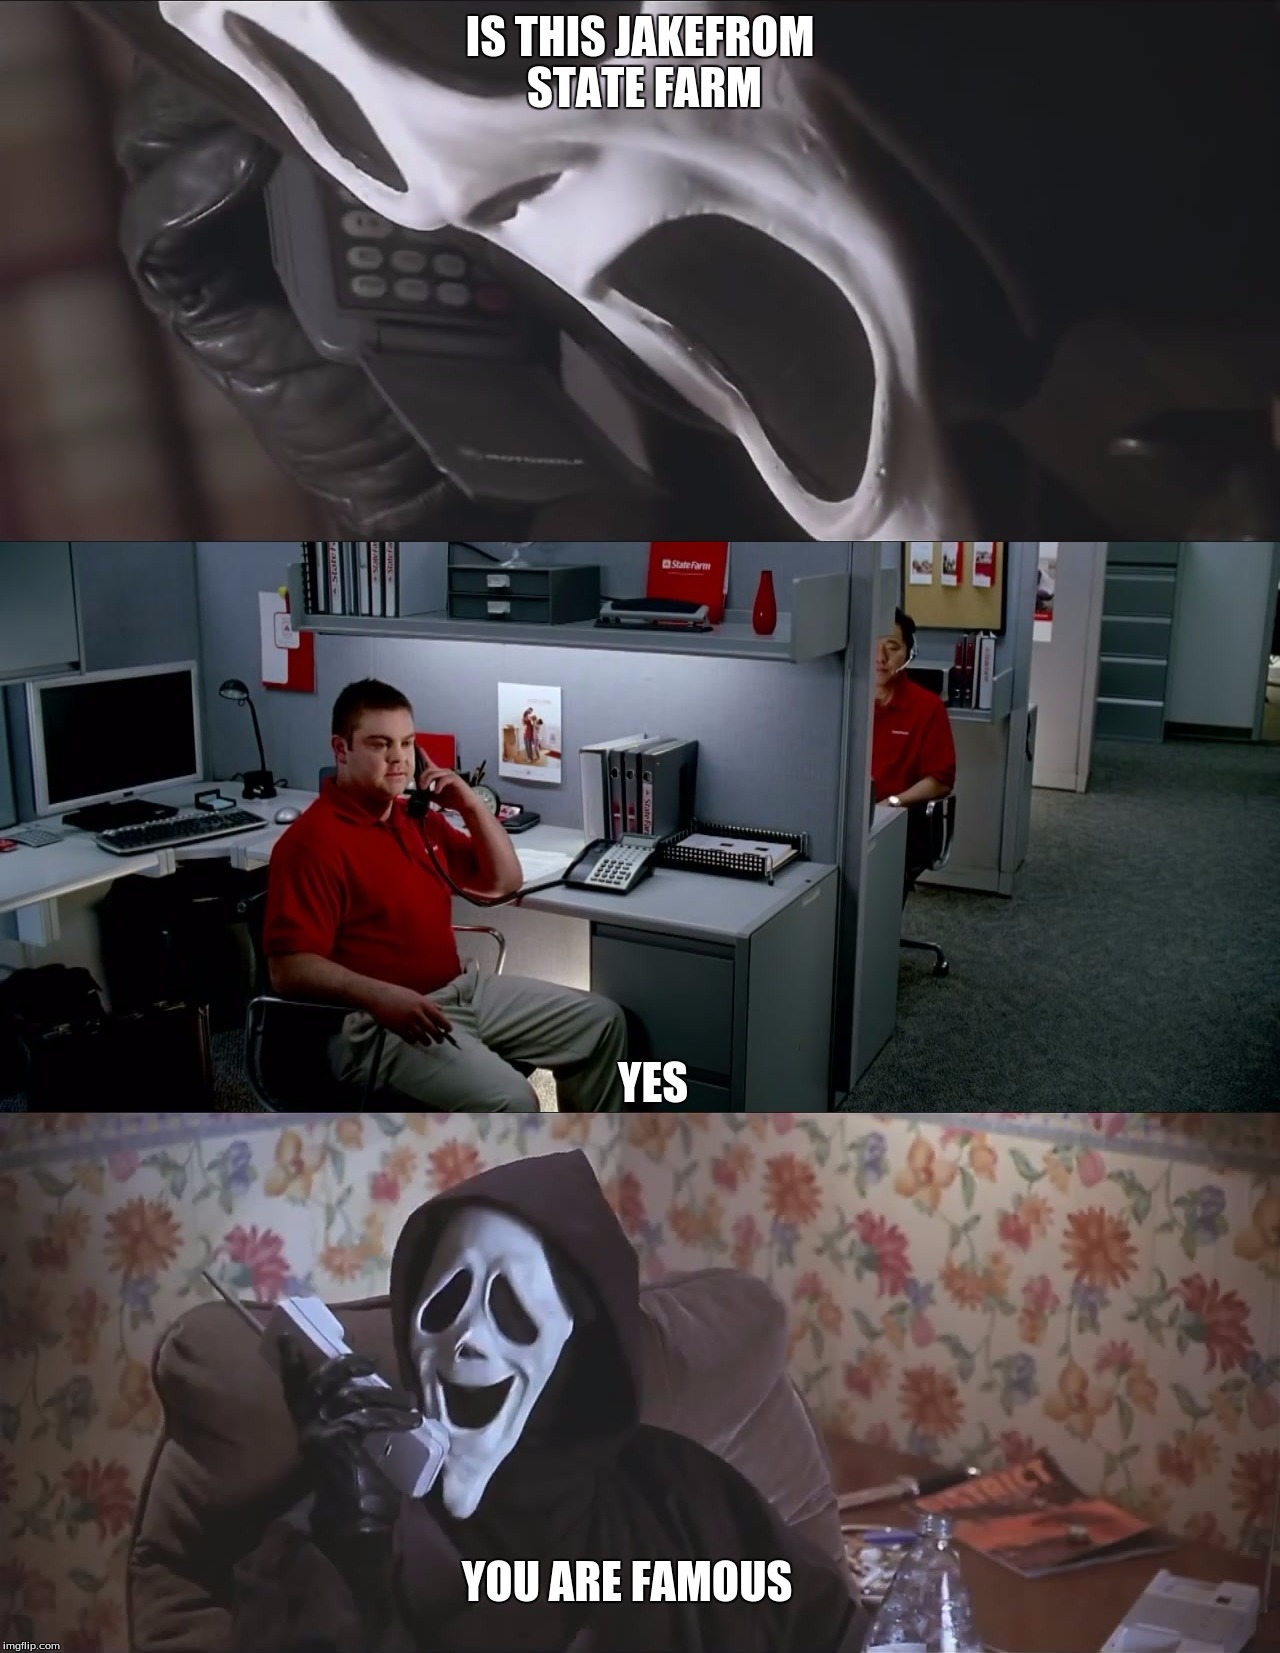 Jake from State Farm calls killer | IS THIS JAKEFROM STATE FARM; YES; YOU ARE FAMOUS | image tagged in jake from state farm calls killer | made w/ Imgflip meme maker